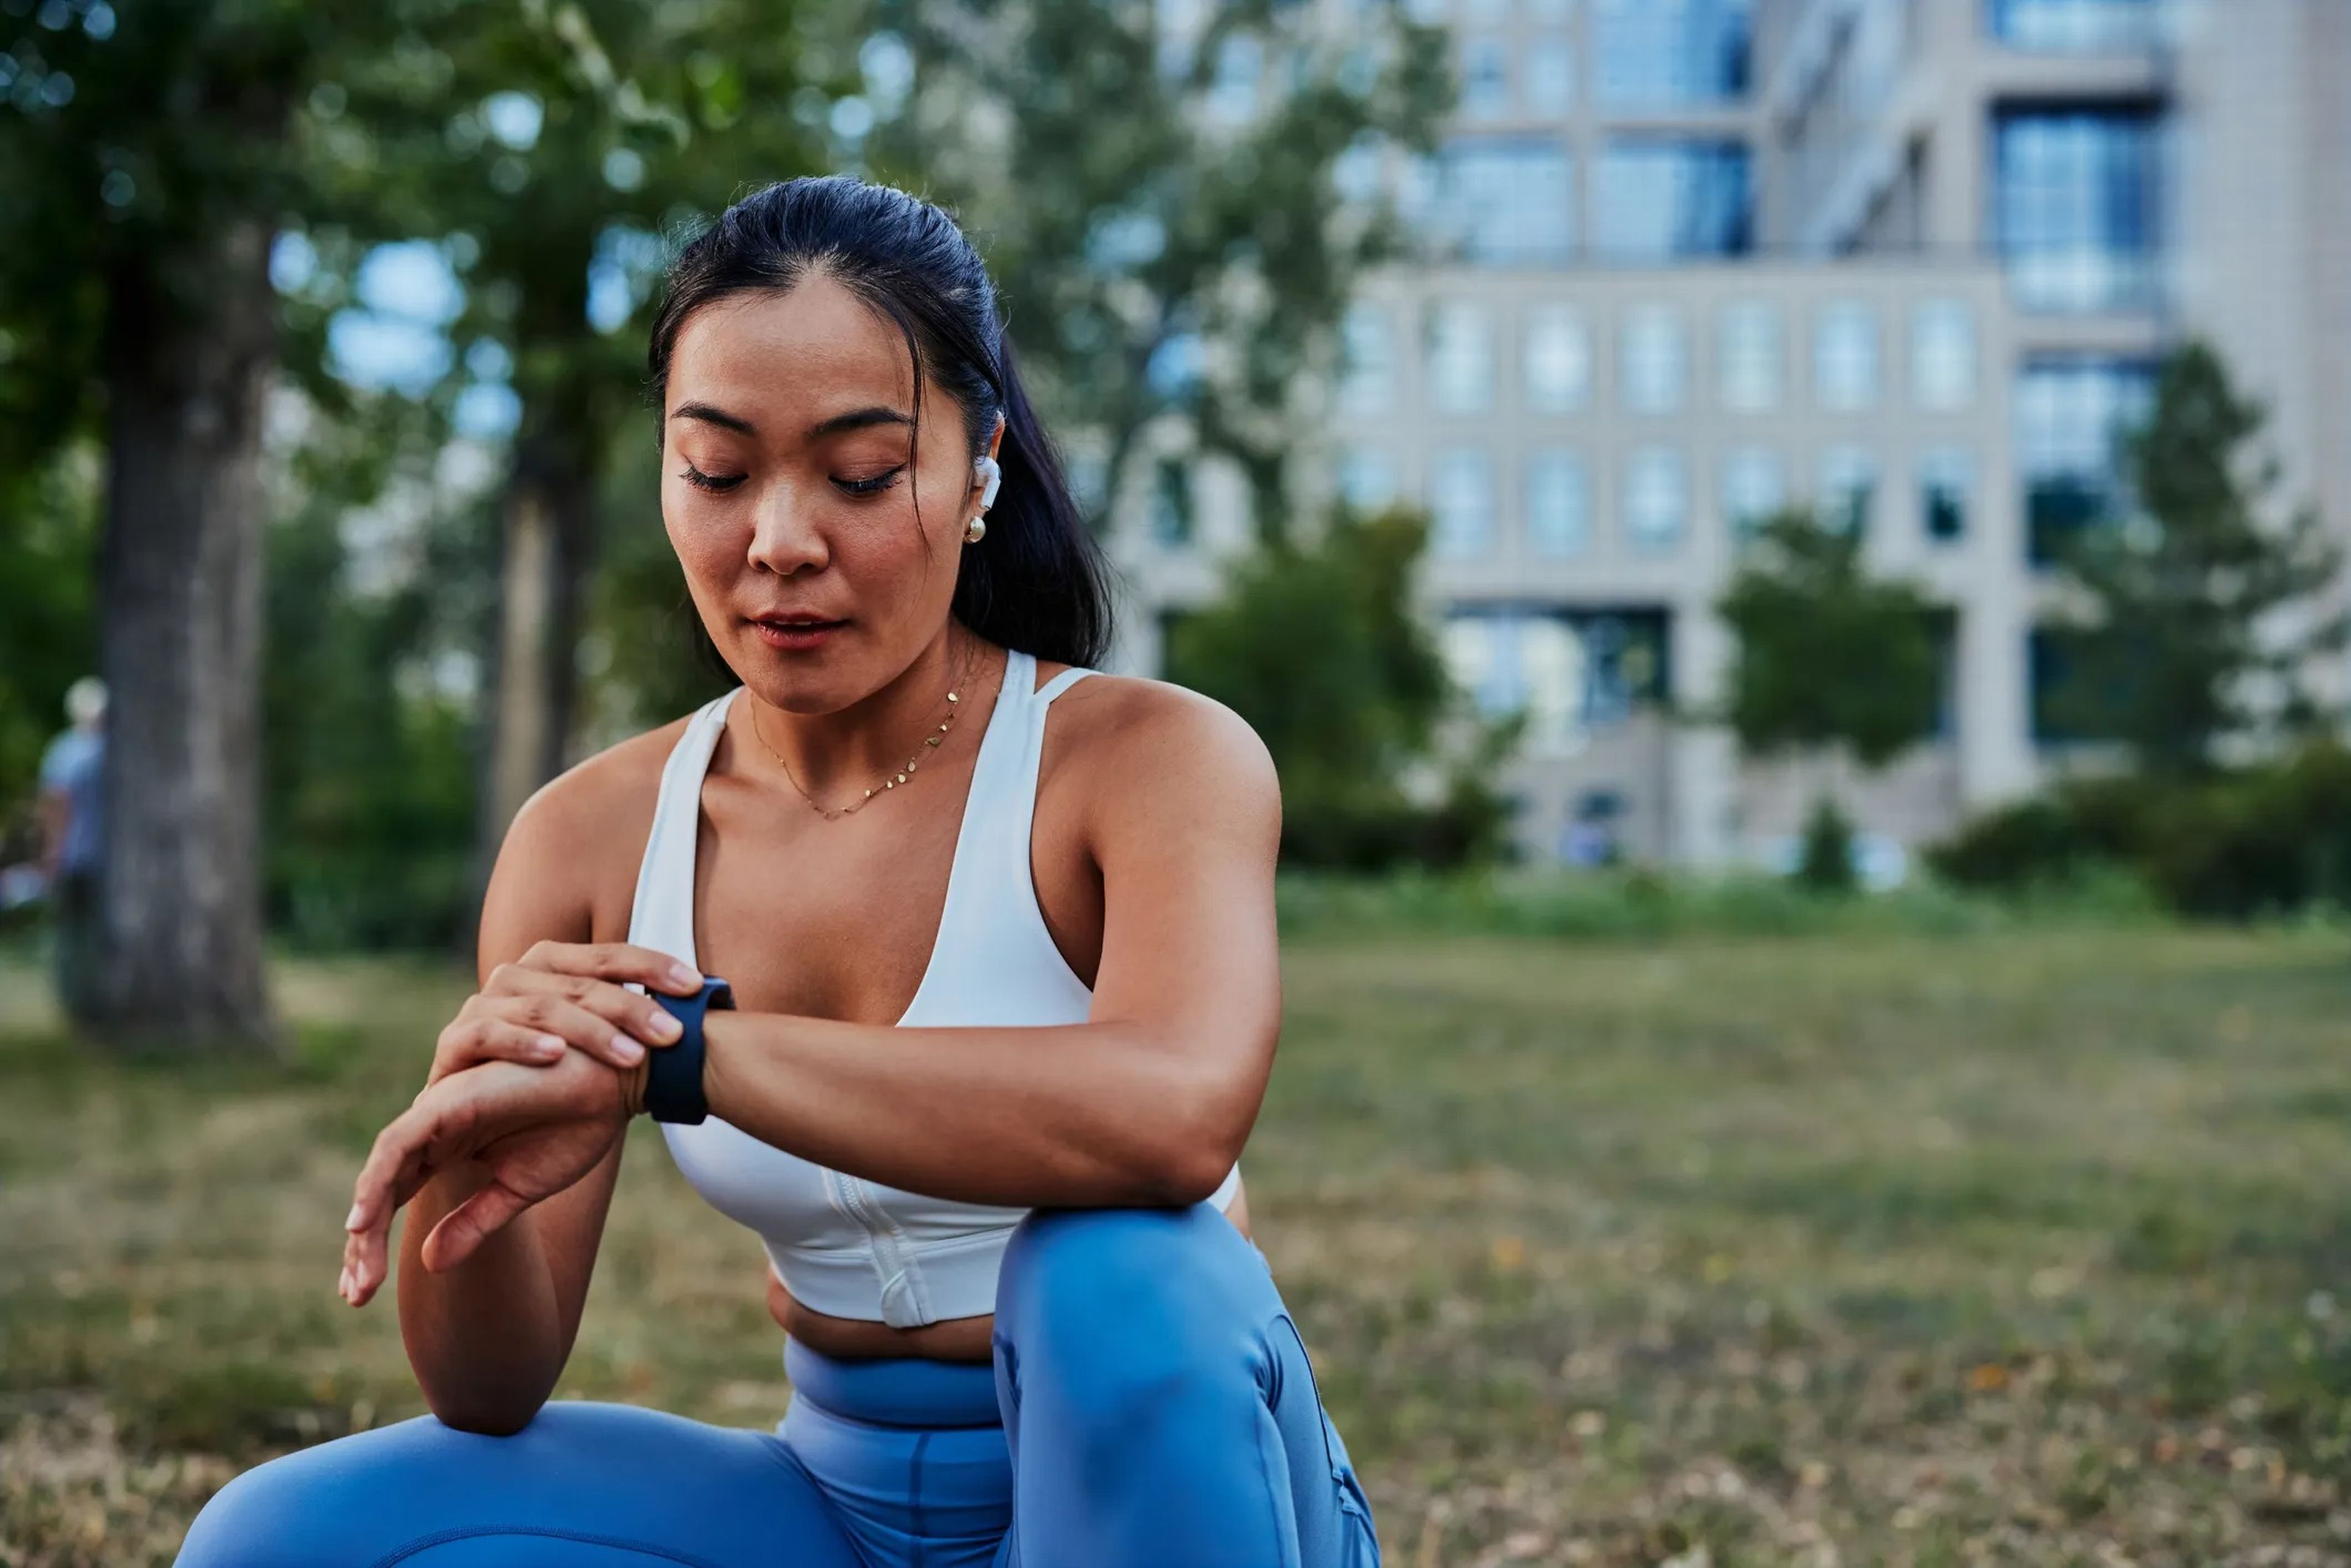 A woman in a sports bra and blue tights checking a smart watch on a run outside